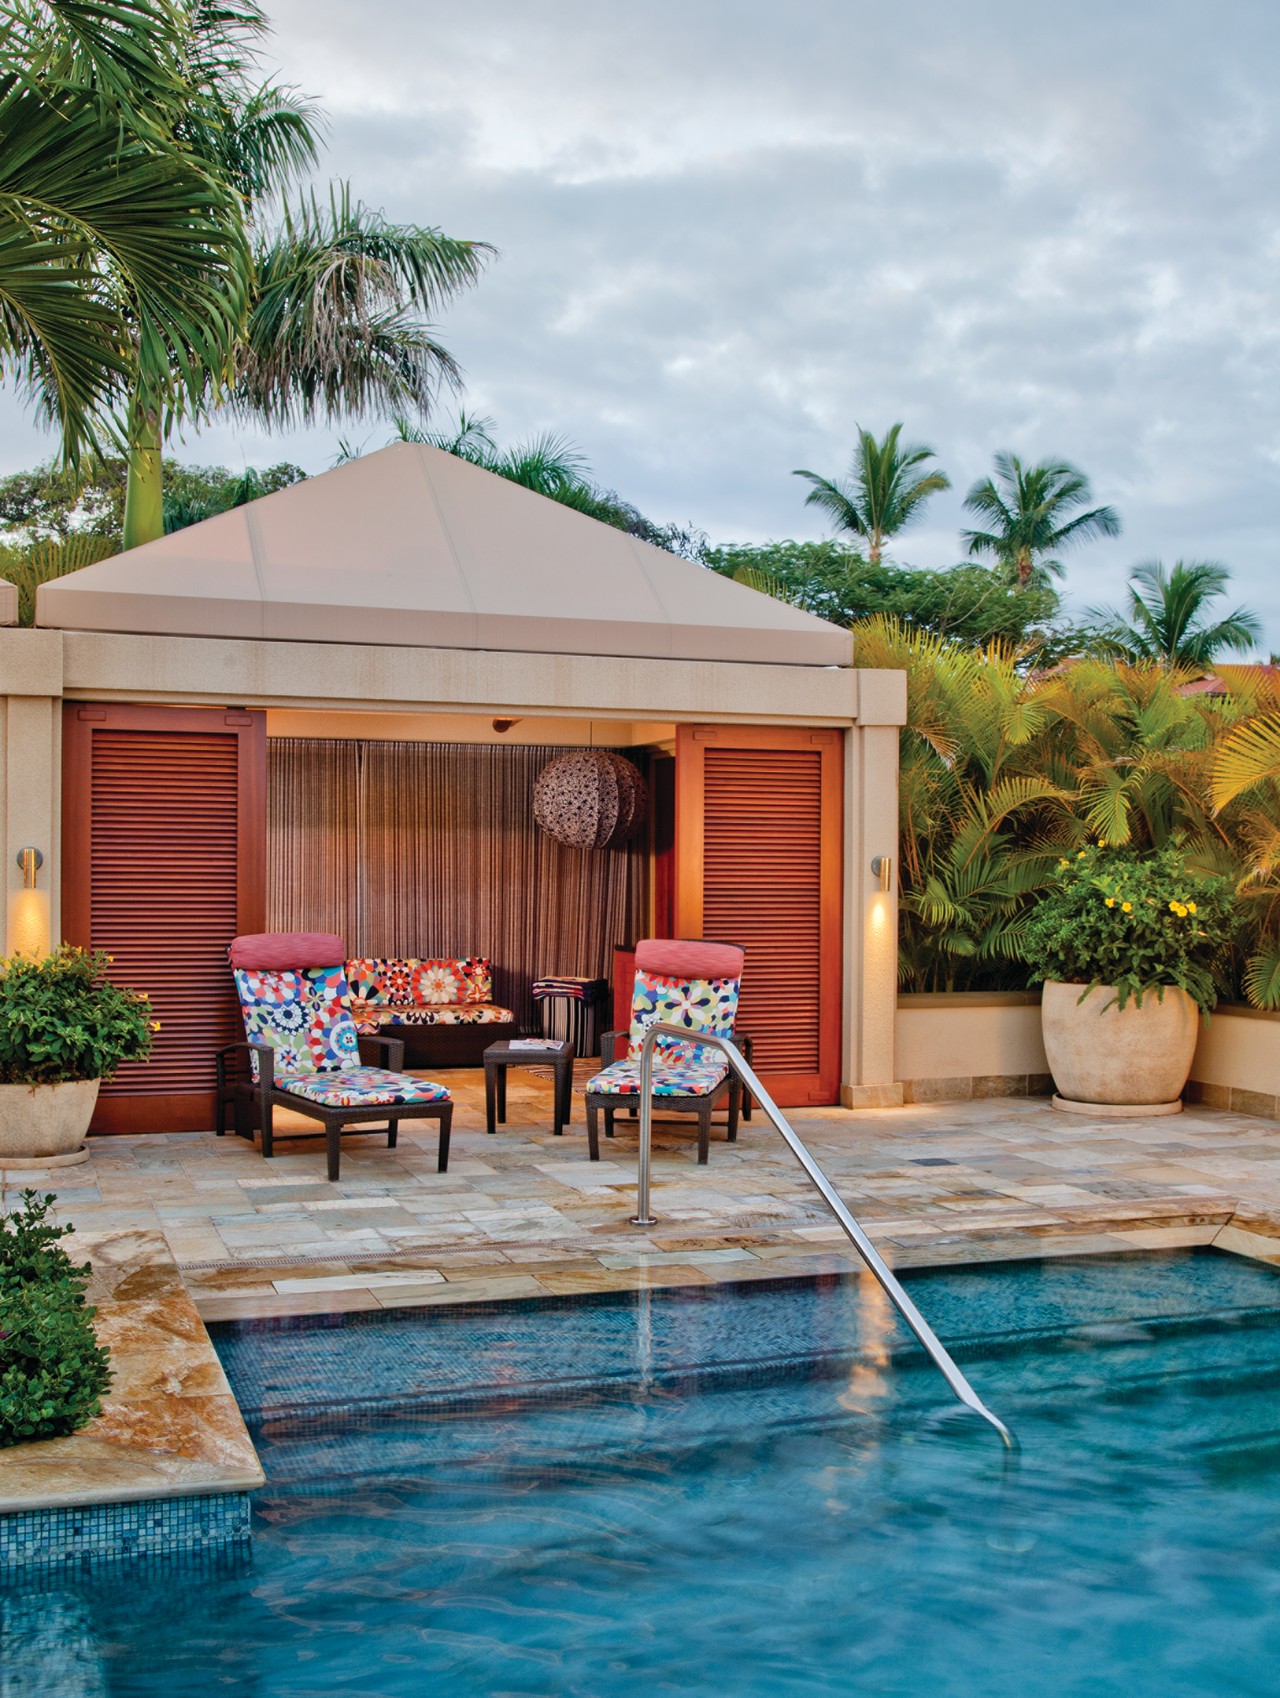 Reserve one of the Missoni designer cabanas at Four Seasons Resort Maui's adults-only Serenity Pool